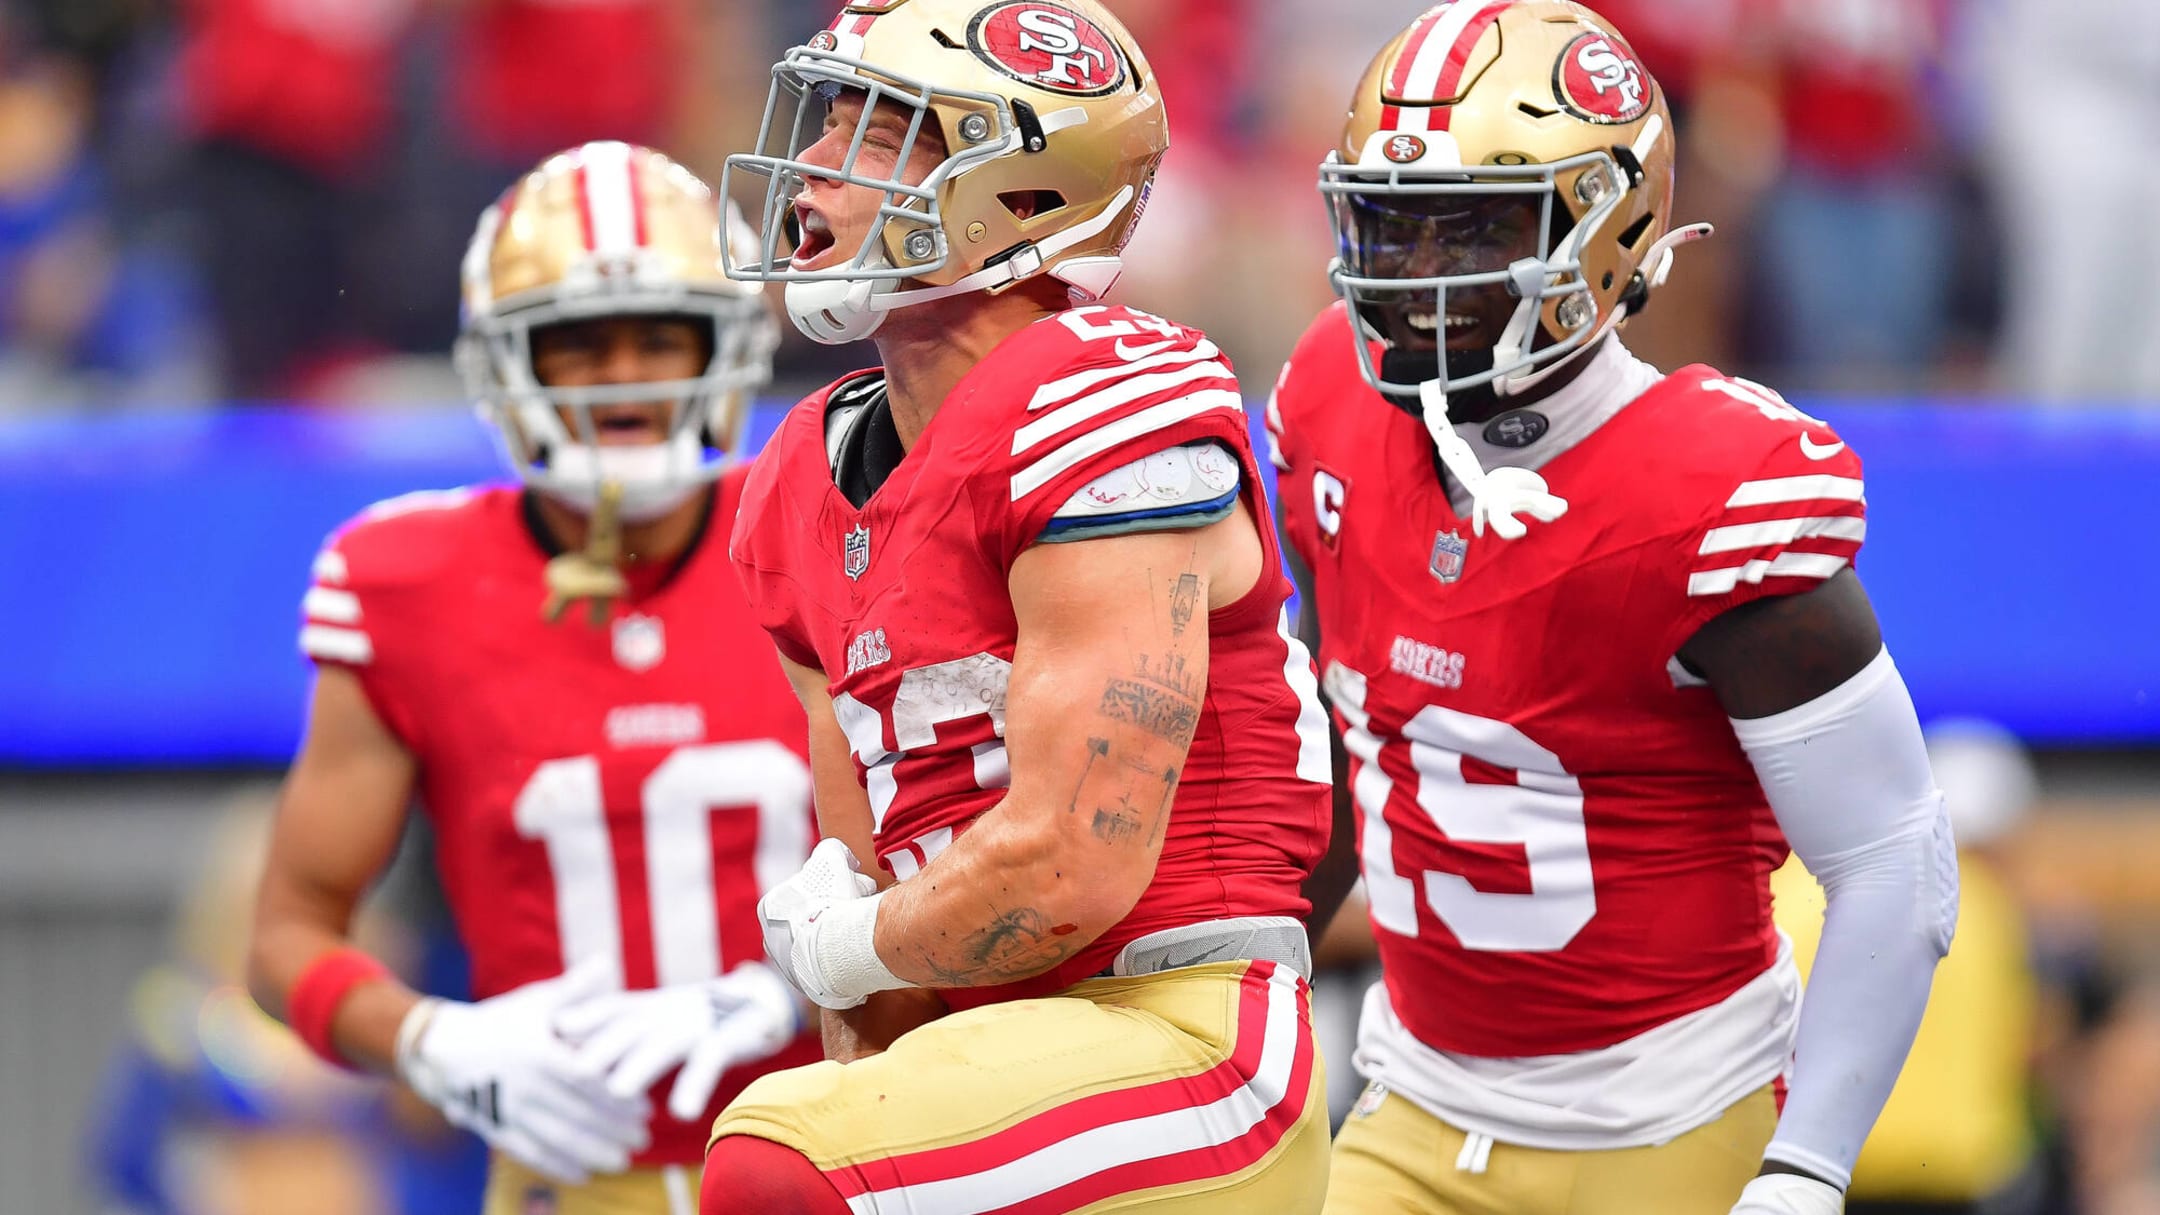 NFL 'TNF' Week 3: Best bets and preview for 49ers vs. Giants